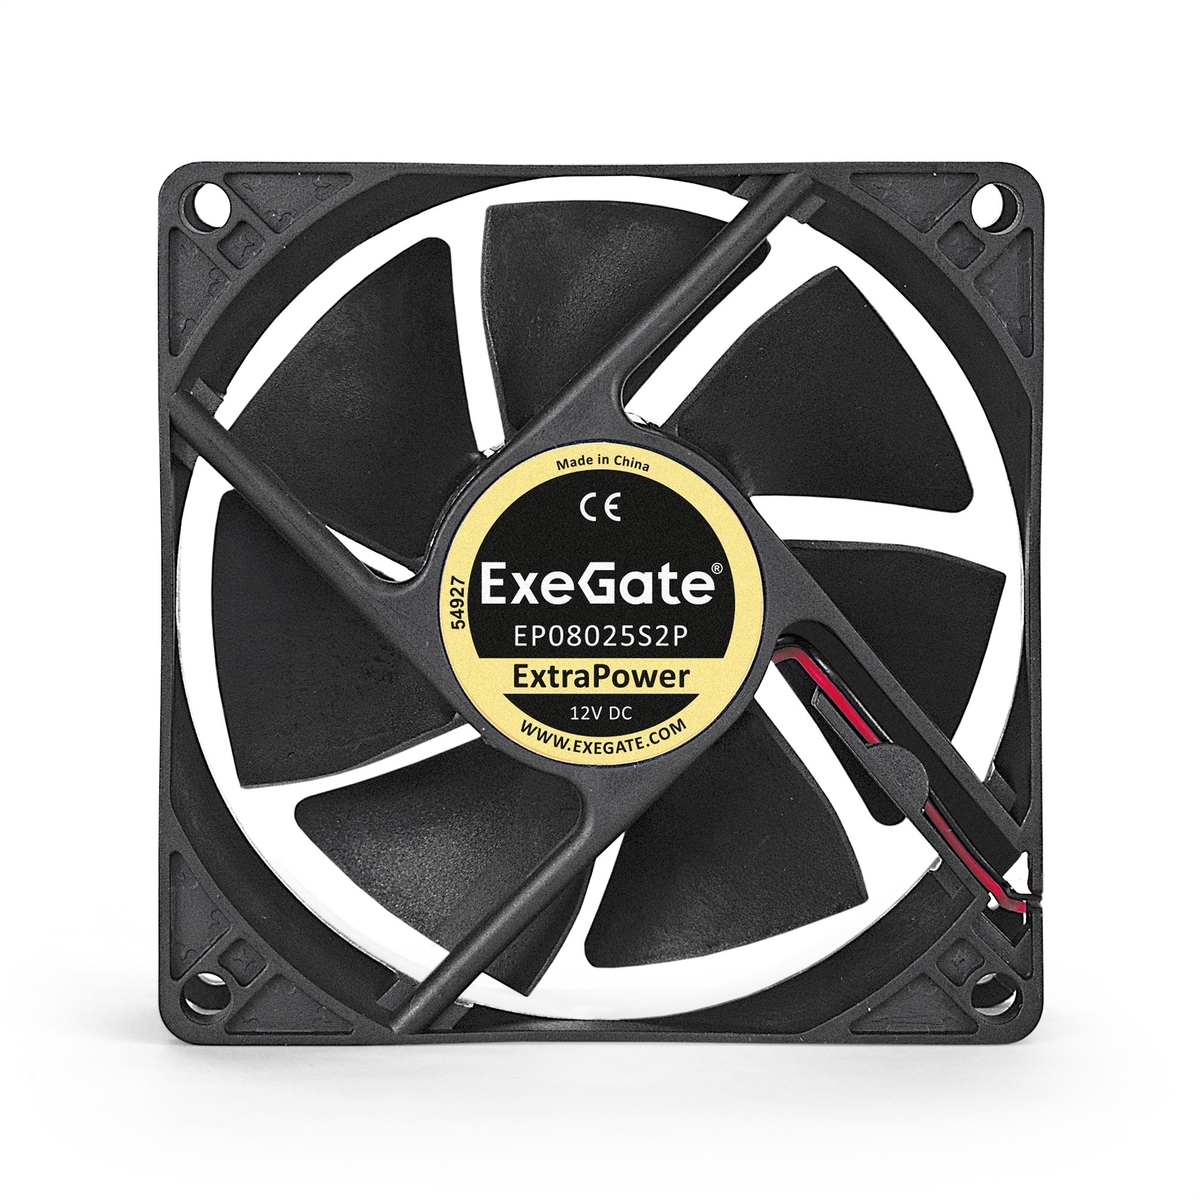  ExeGate ExtraPower EP08025S2P